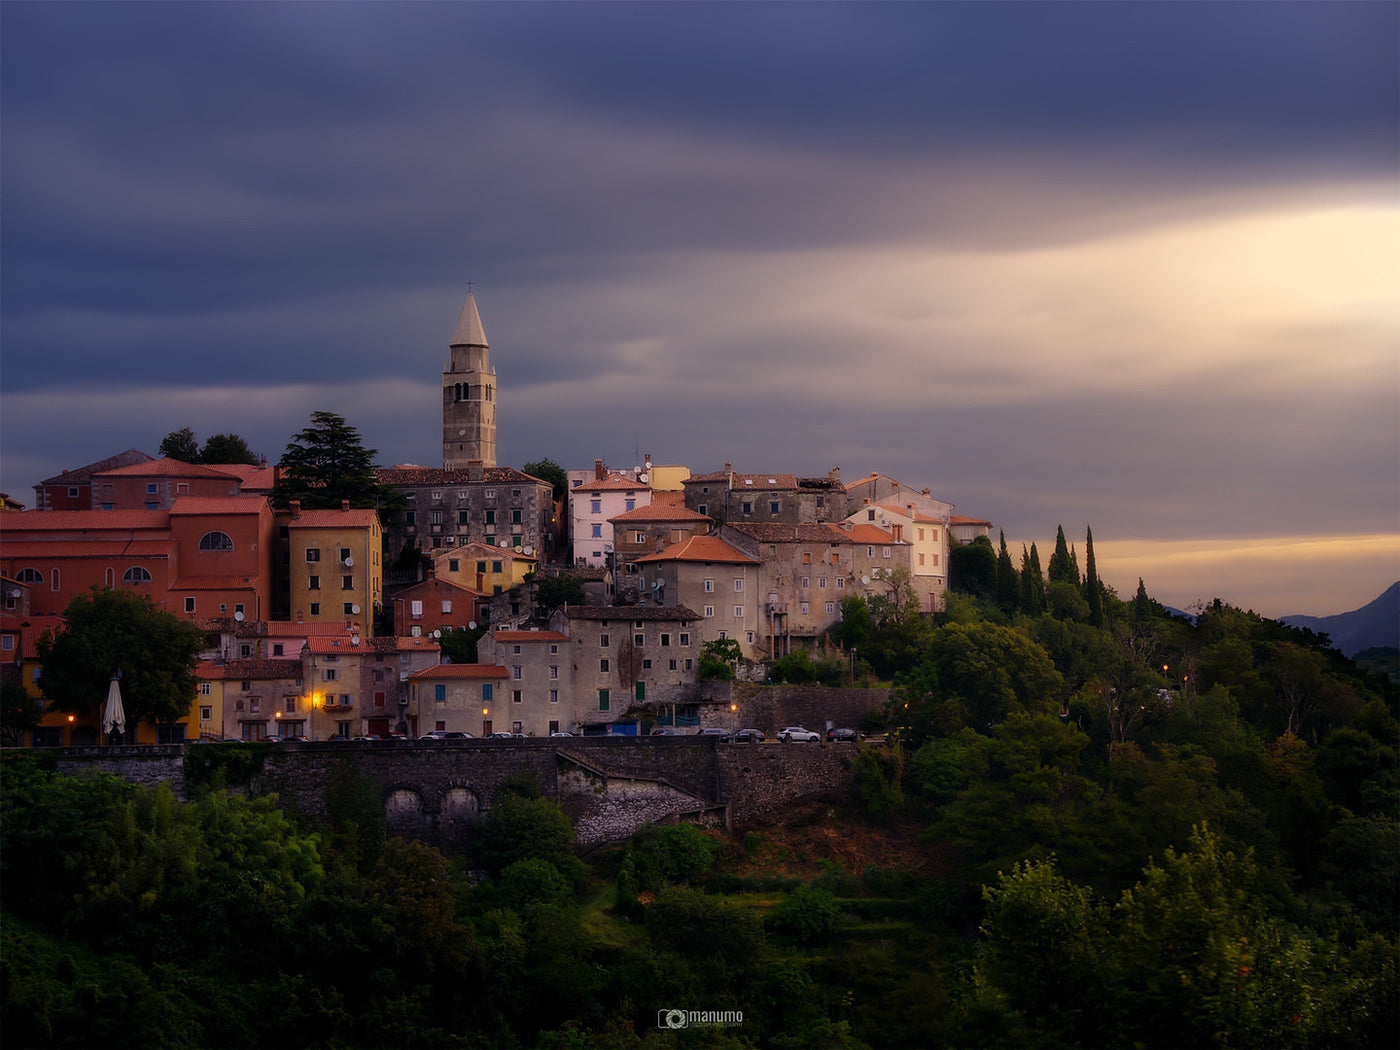 Colorful Istria – Photo Tour and Workshop | manumo-photography.